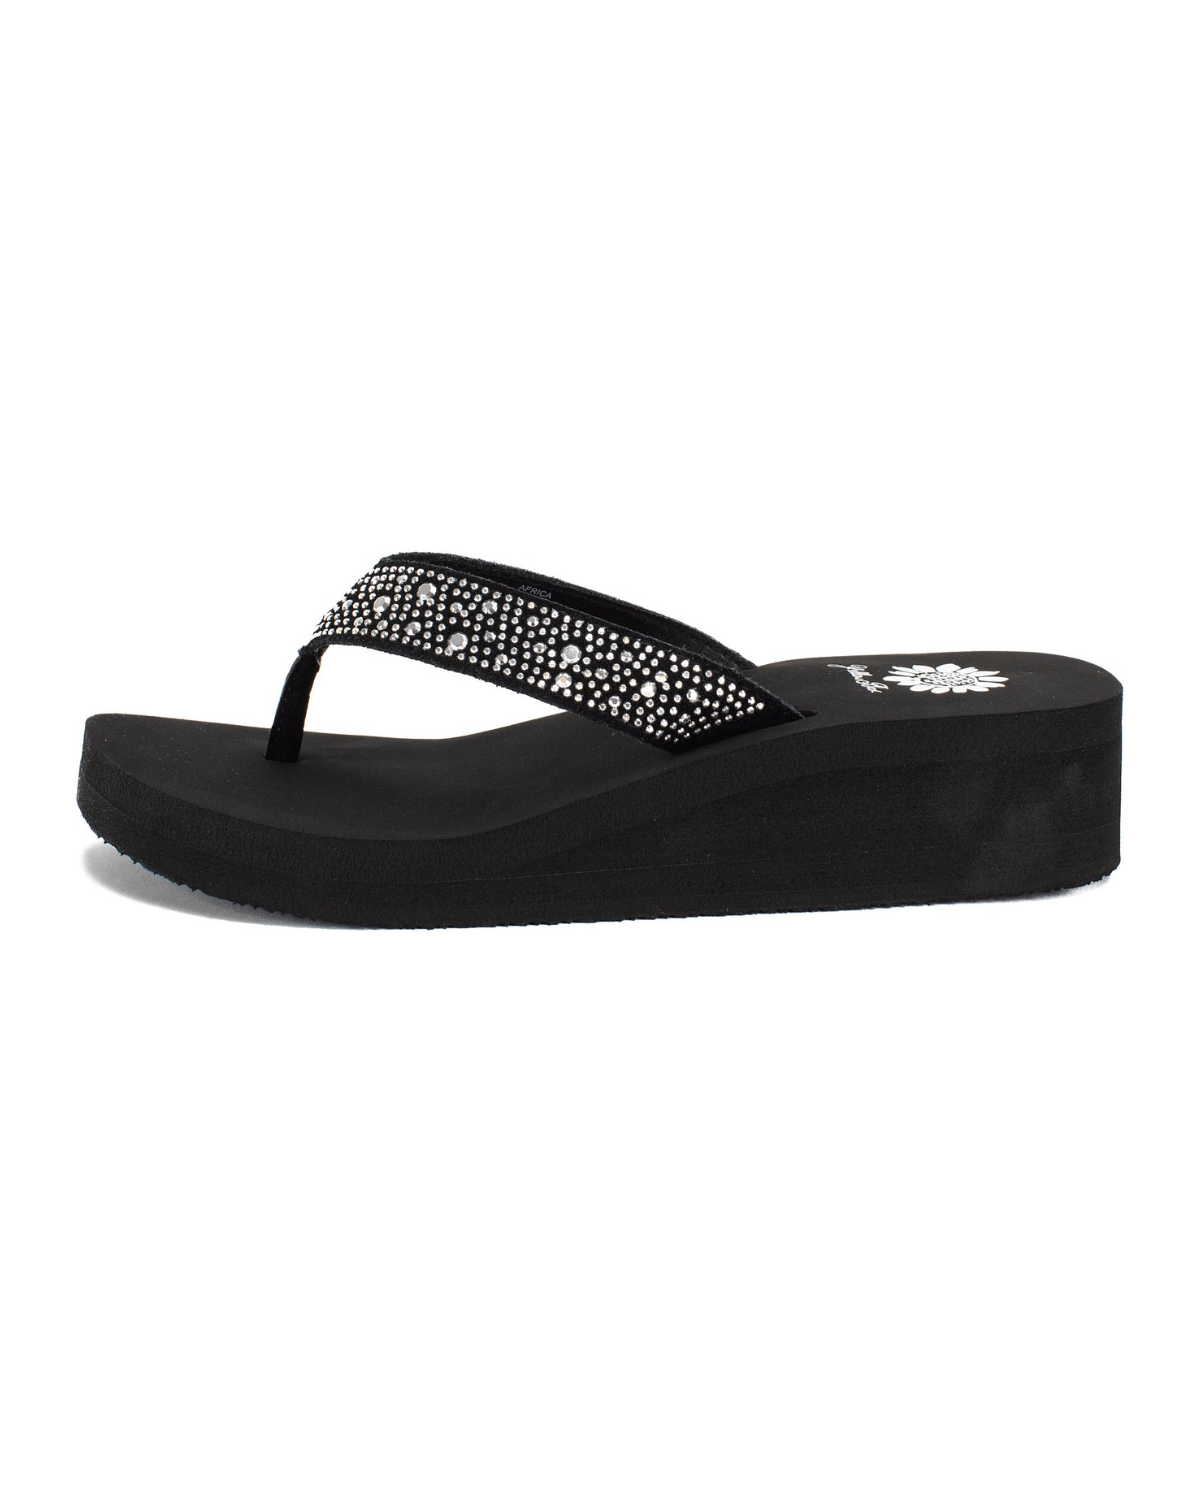 Side view of a black wedge sandal with rhinestones on the strap on a white backdrop.